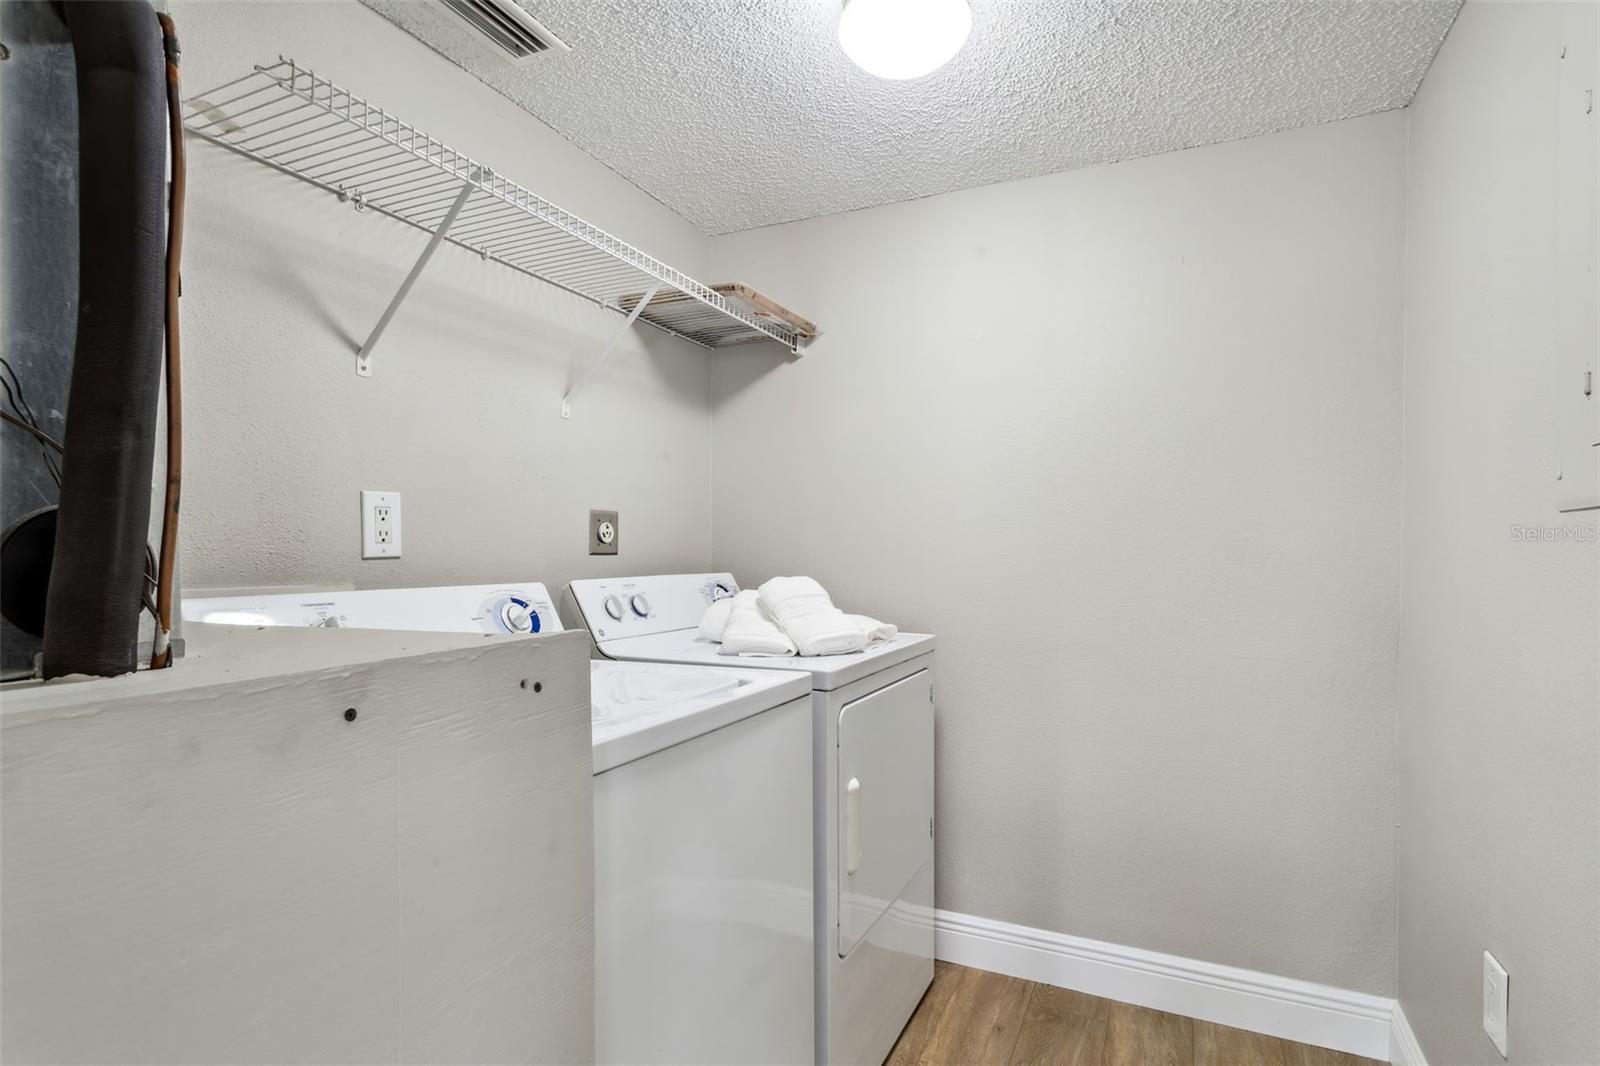 Roomy and bright laundry room includes washer and dryer and shelving. Extra space for storage and easy reach for A/C filters and water heater in same room. Freshly painted and new flooring.